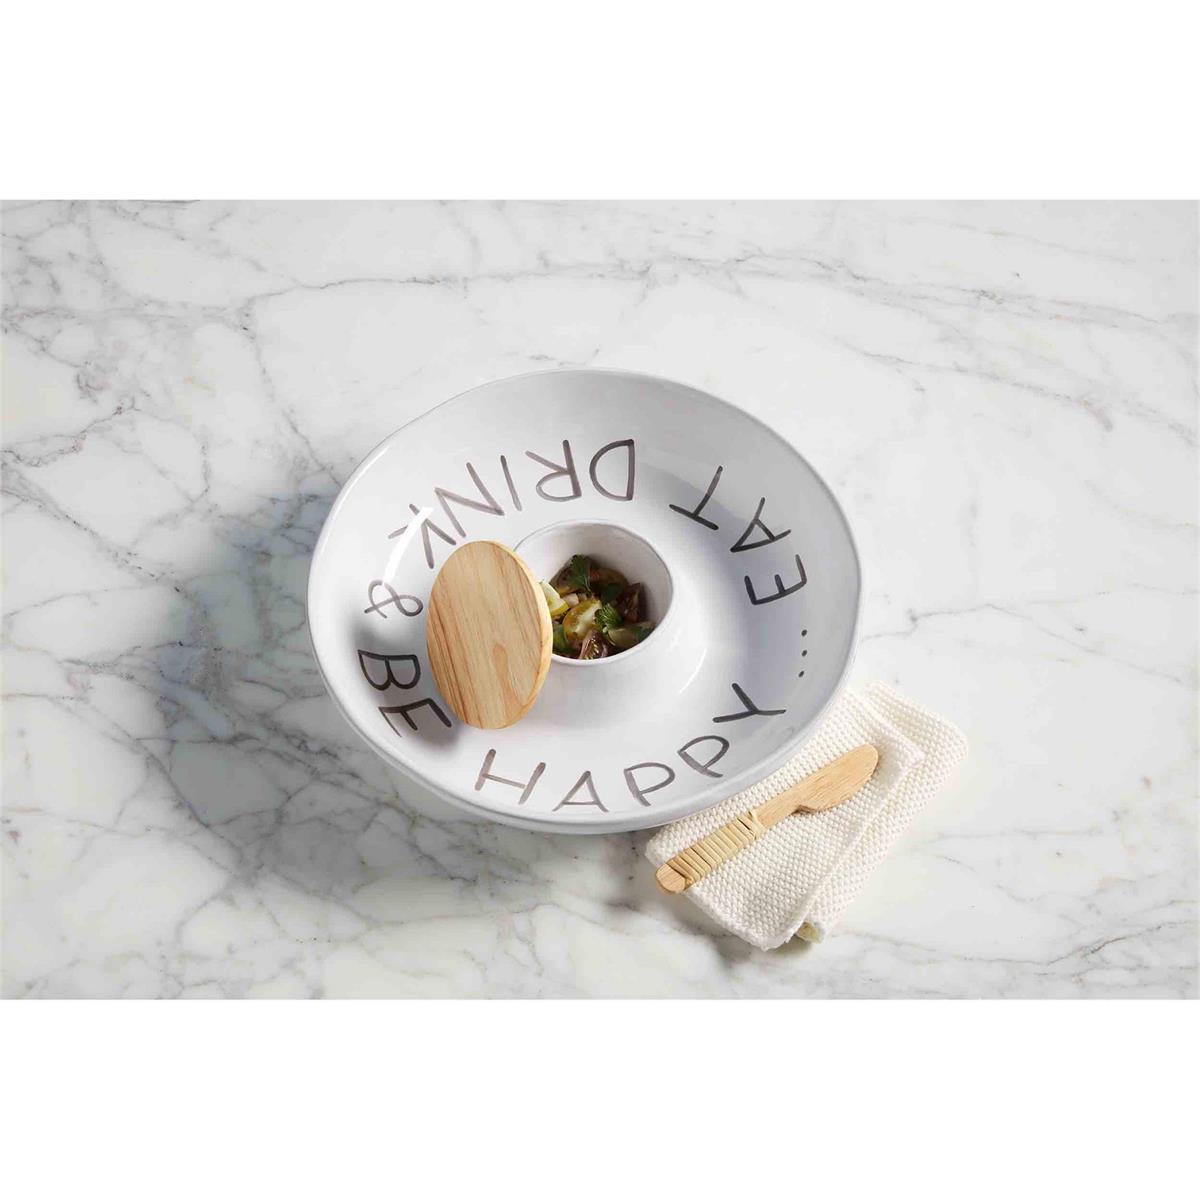 happy chip and dip set displayed next to the spreader on a white and gray marble surface